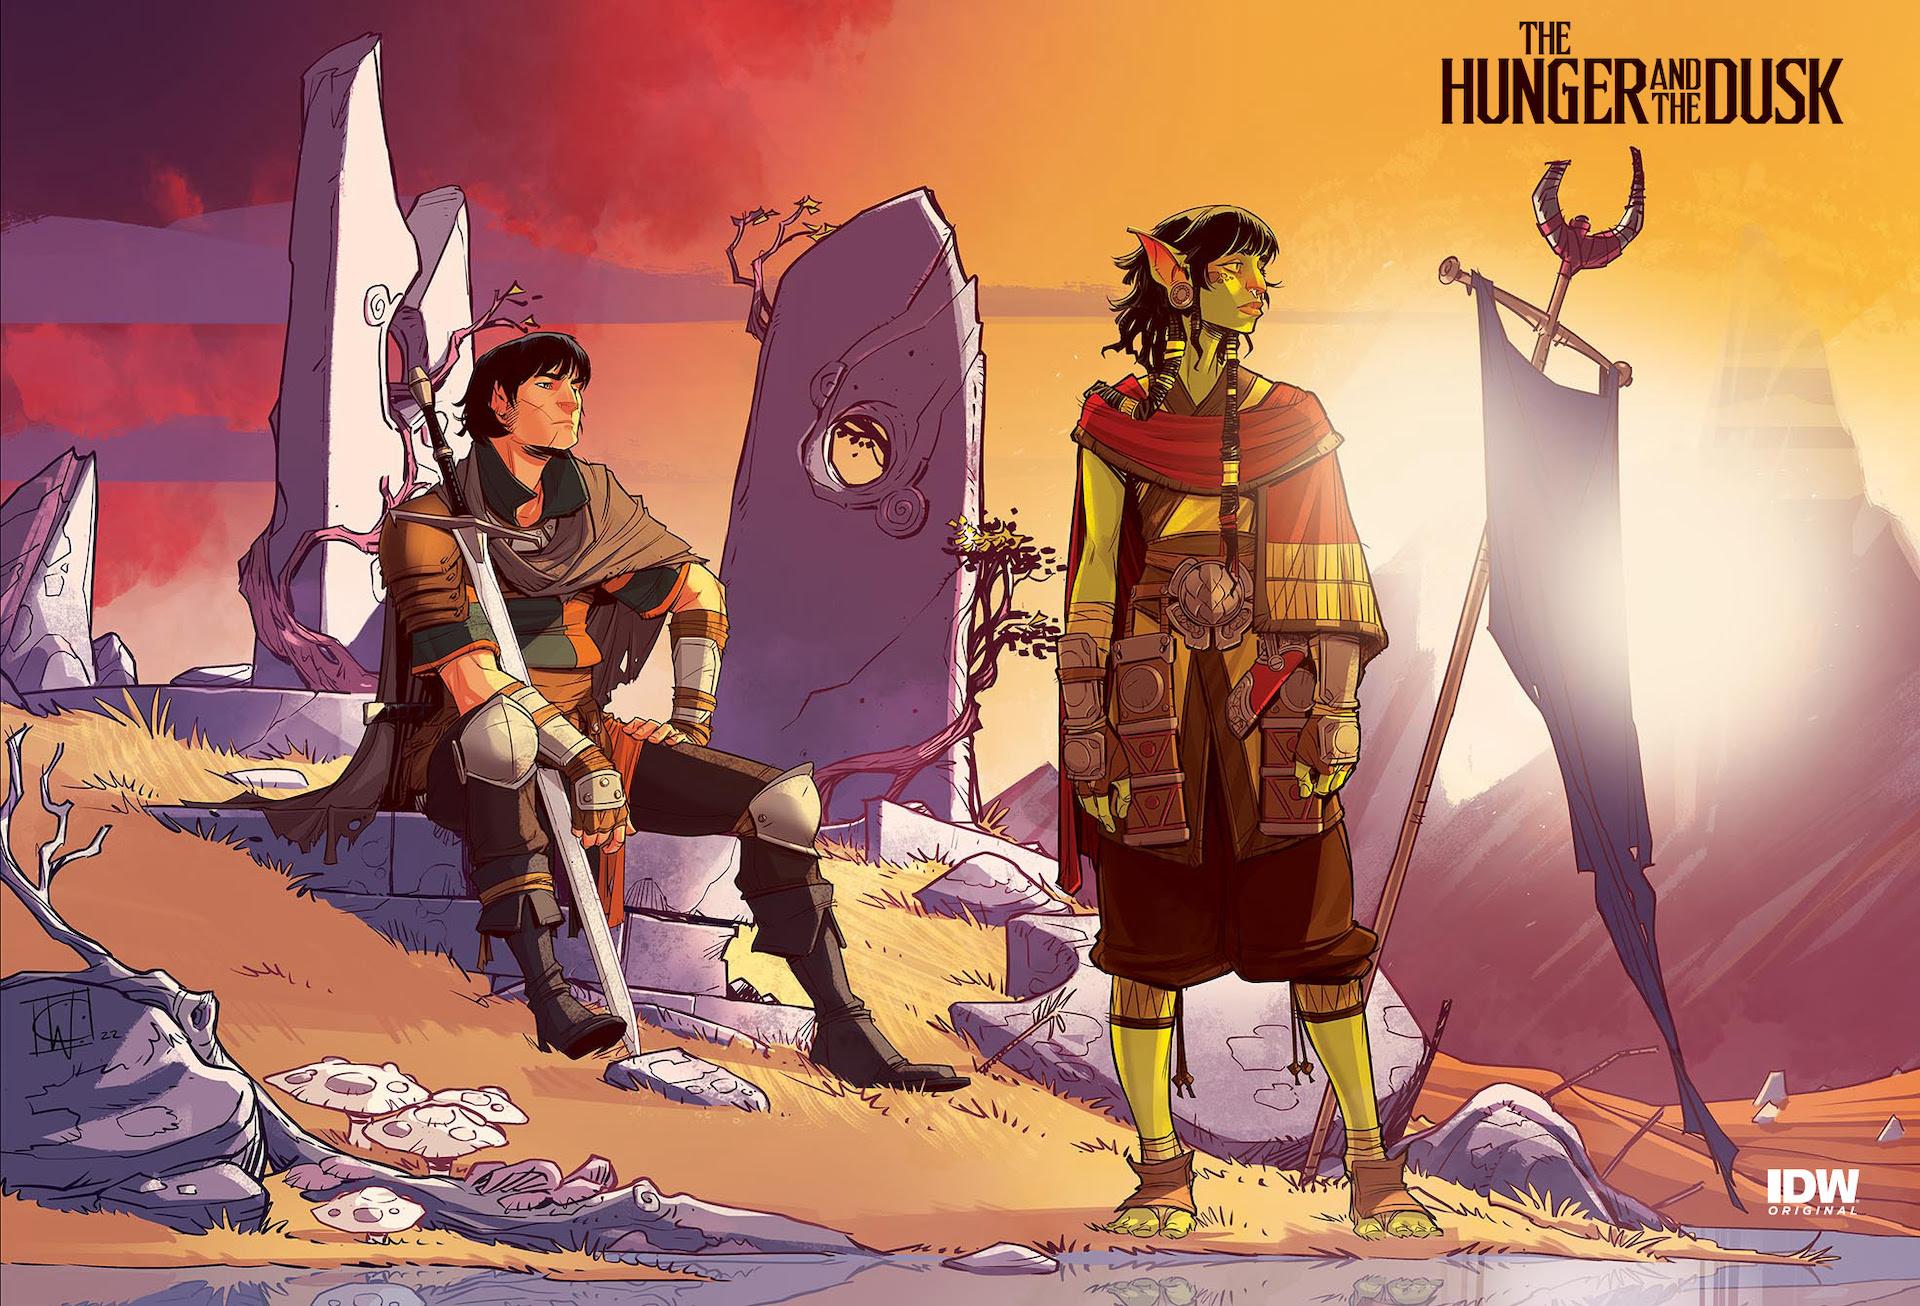 New ongoing high fantasy series 'The Hunger and the Dusk' launching July 2023